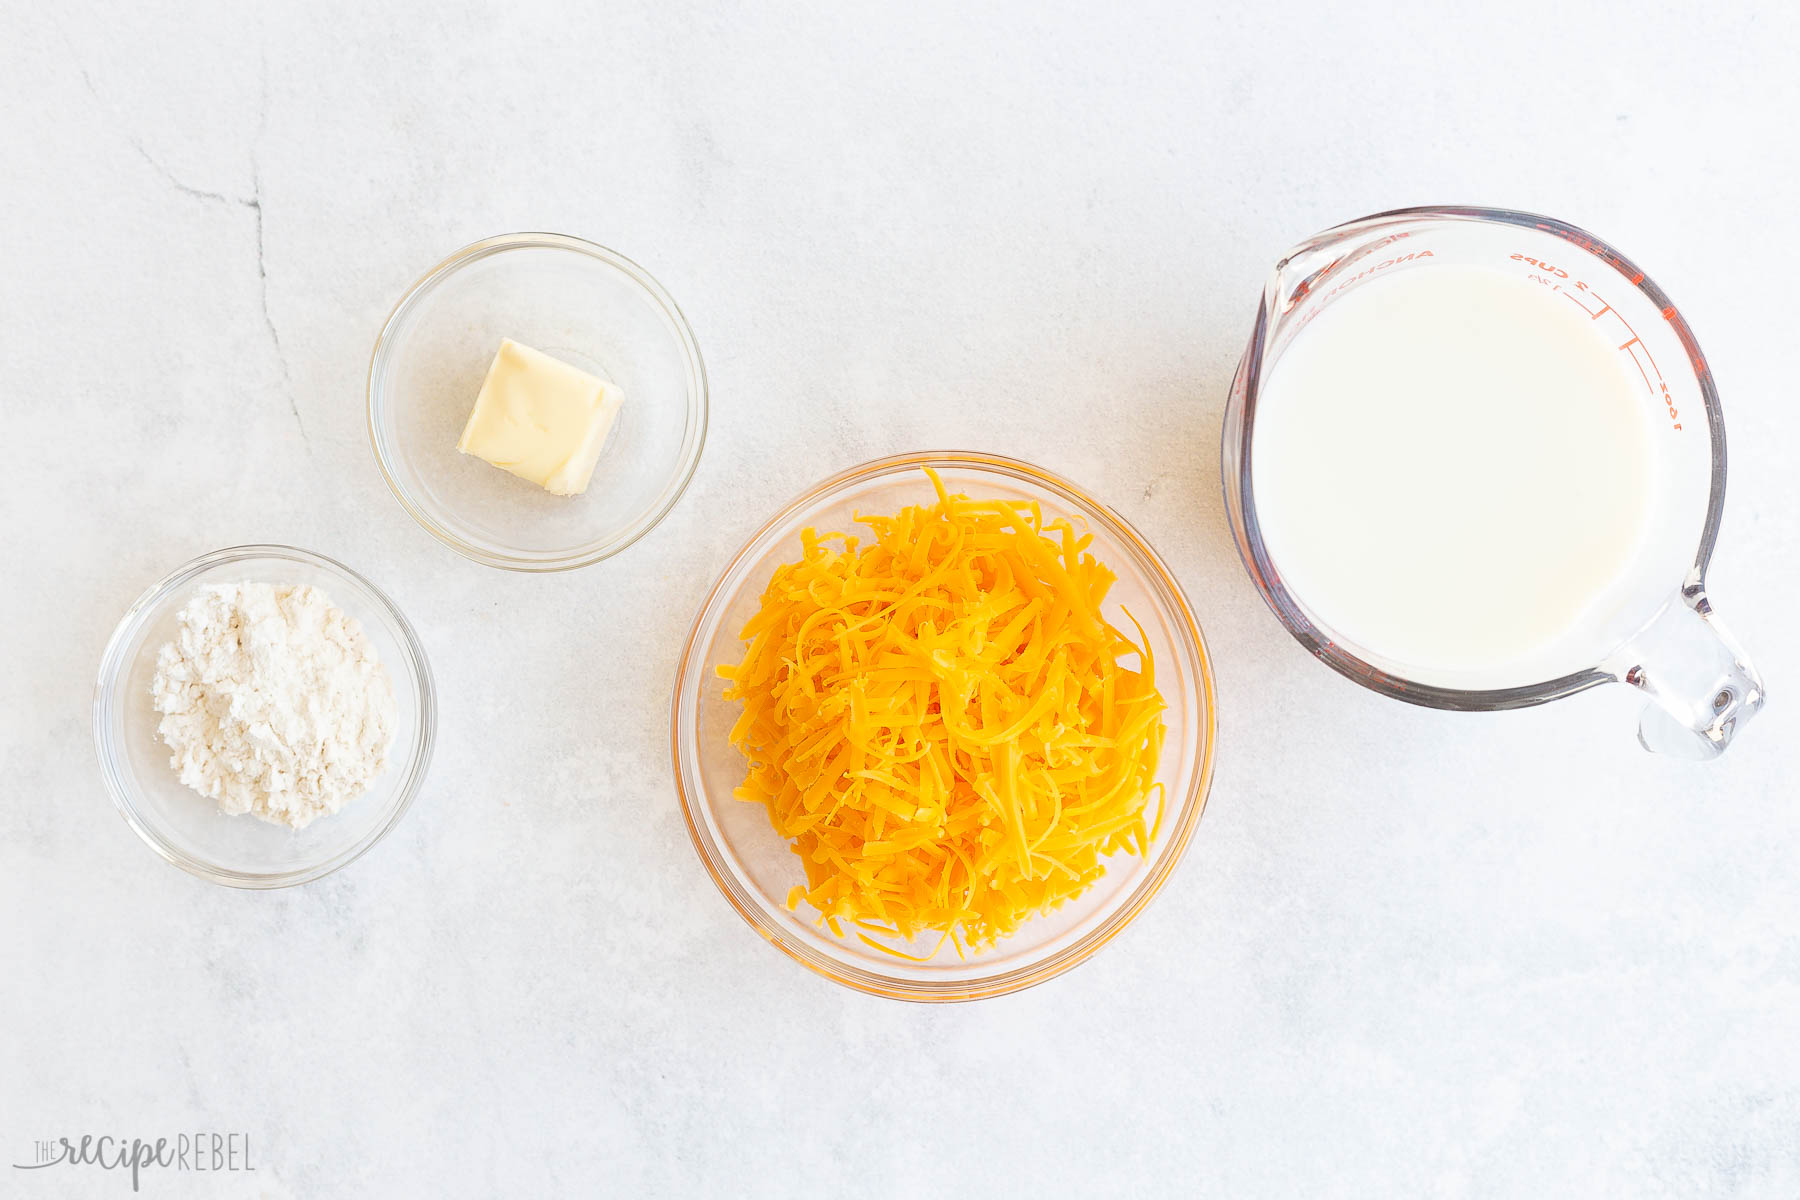 ingredients needed to make cheddar sauce on white background